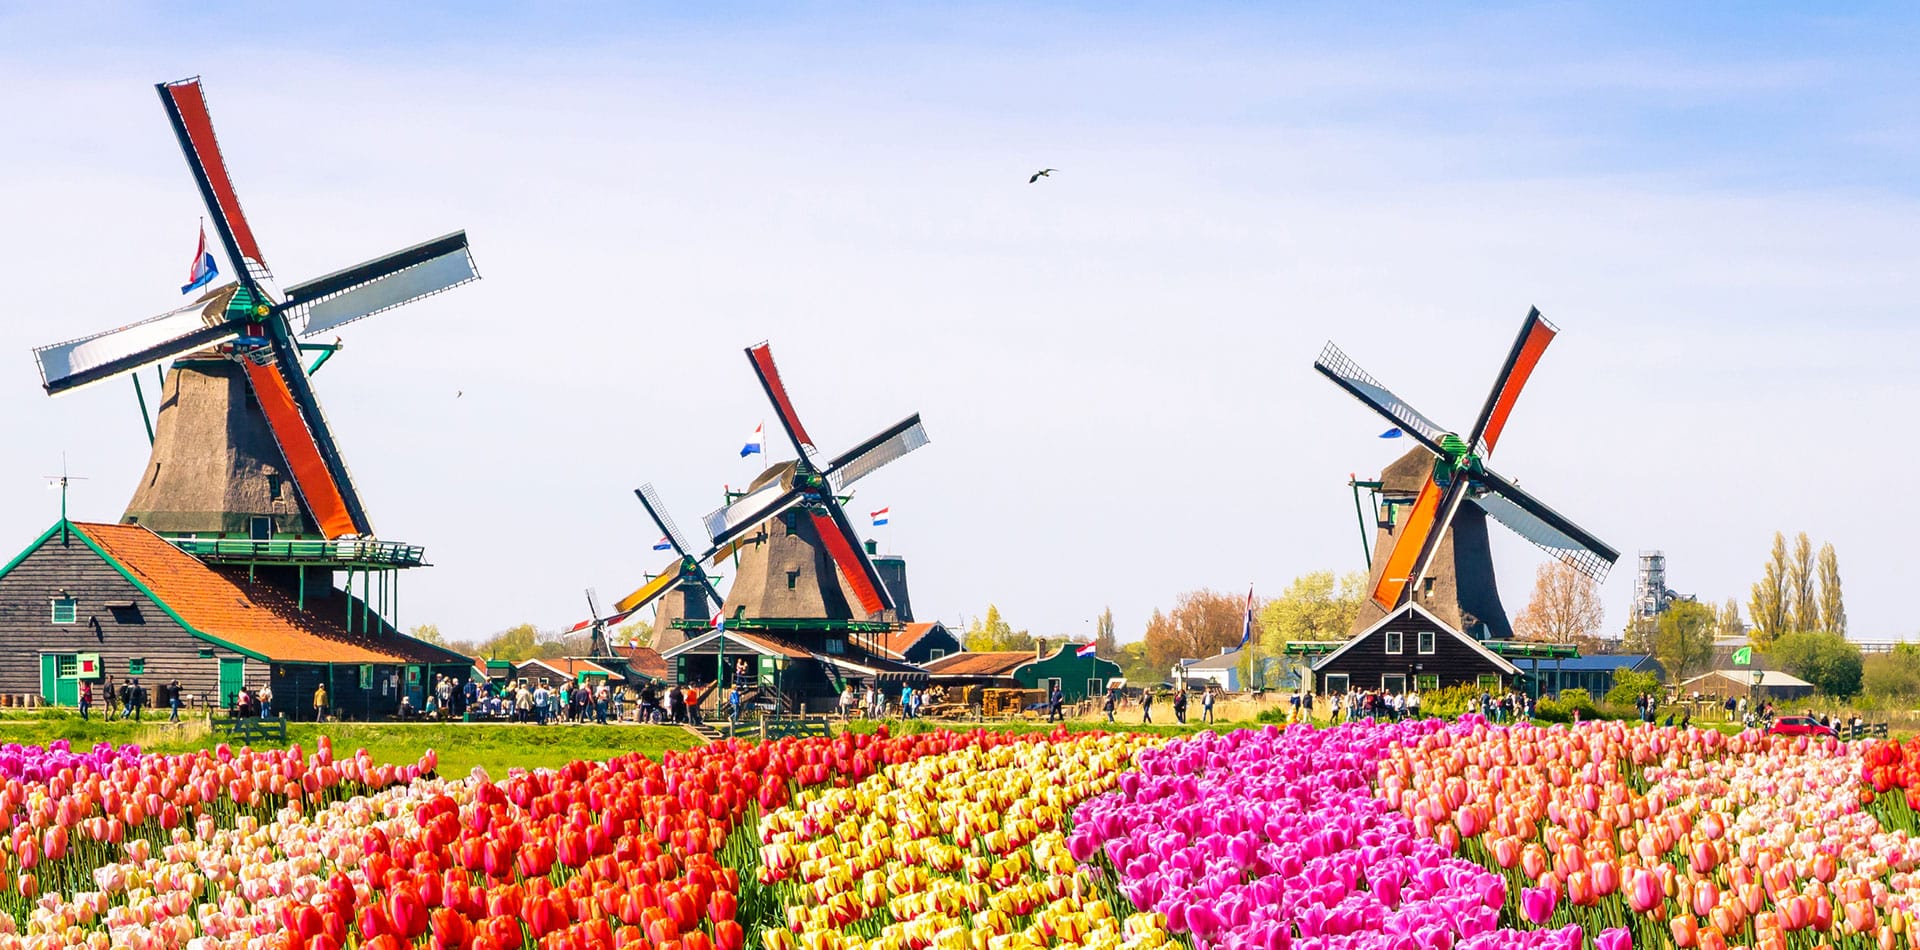 Windmills in Amsterdam with tulips, Netherlands